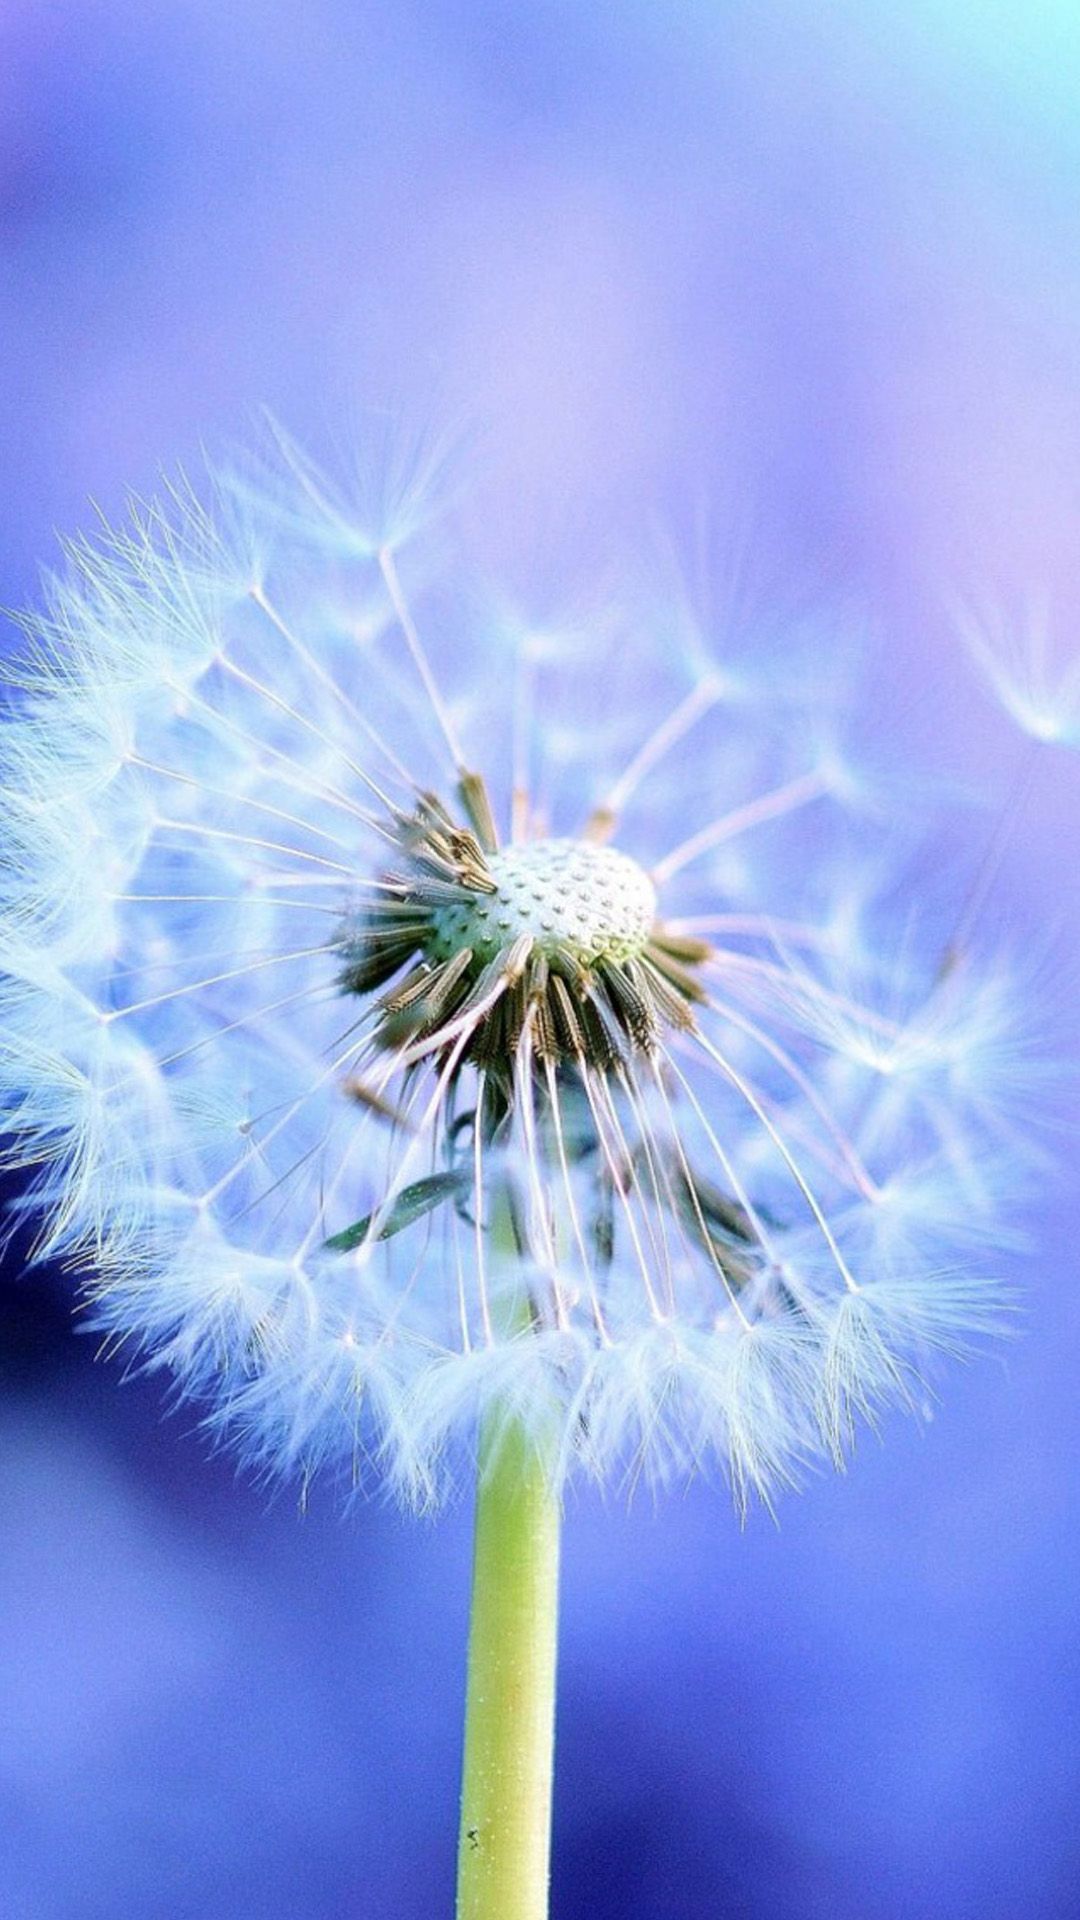 Pure Blowing Dandelion Blue Background IPhone 6 Wallpaper Download. IPhone Wallpaper, IPad Wallpaper One Stop. IPhone 6 Wallpaper, Blowing Dandelion, Dandelion